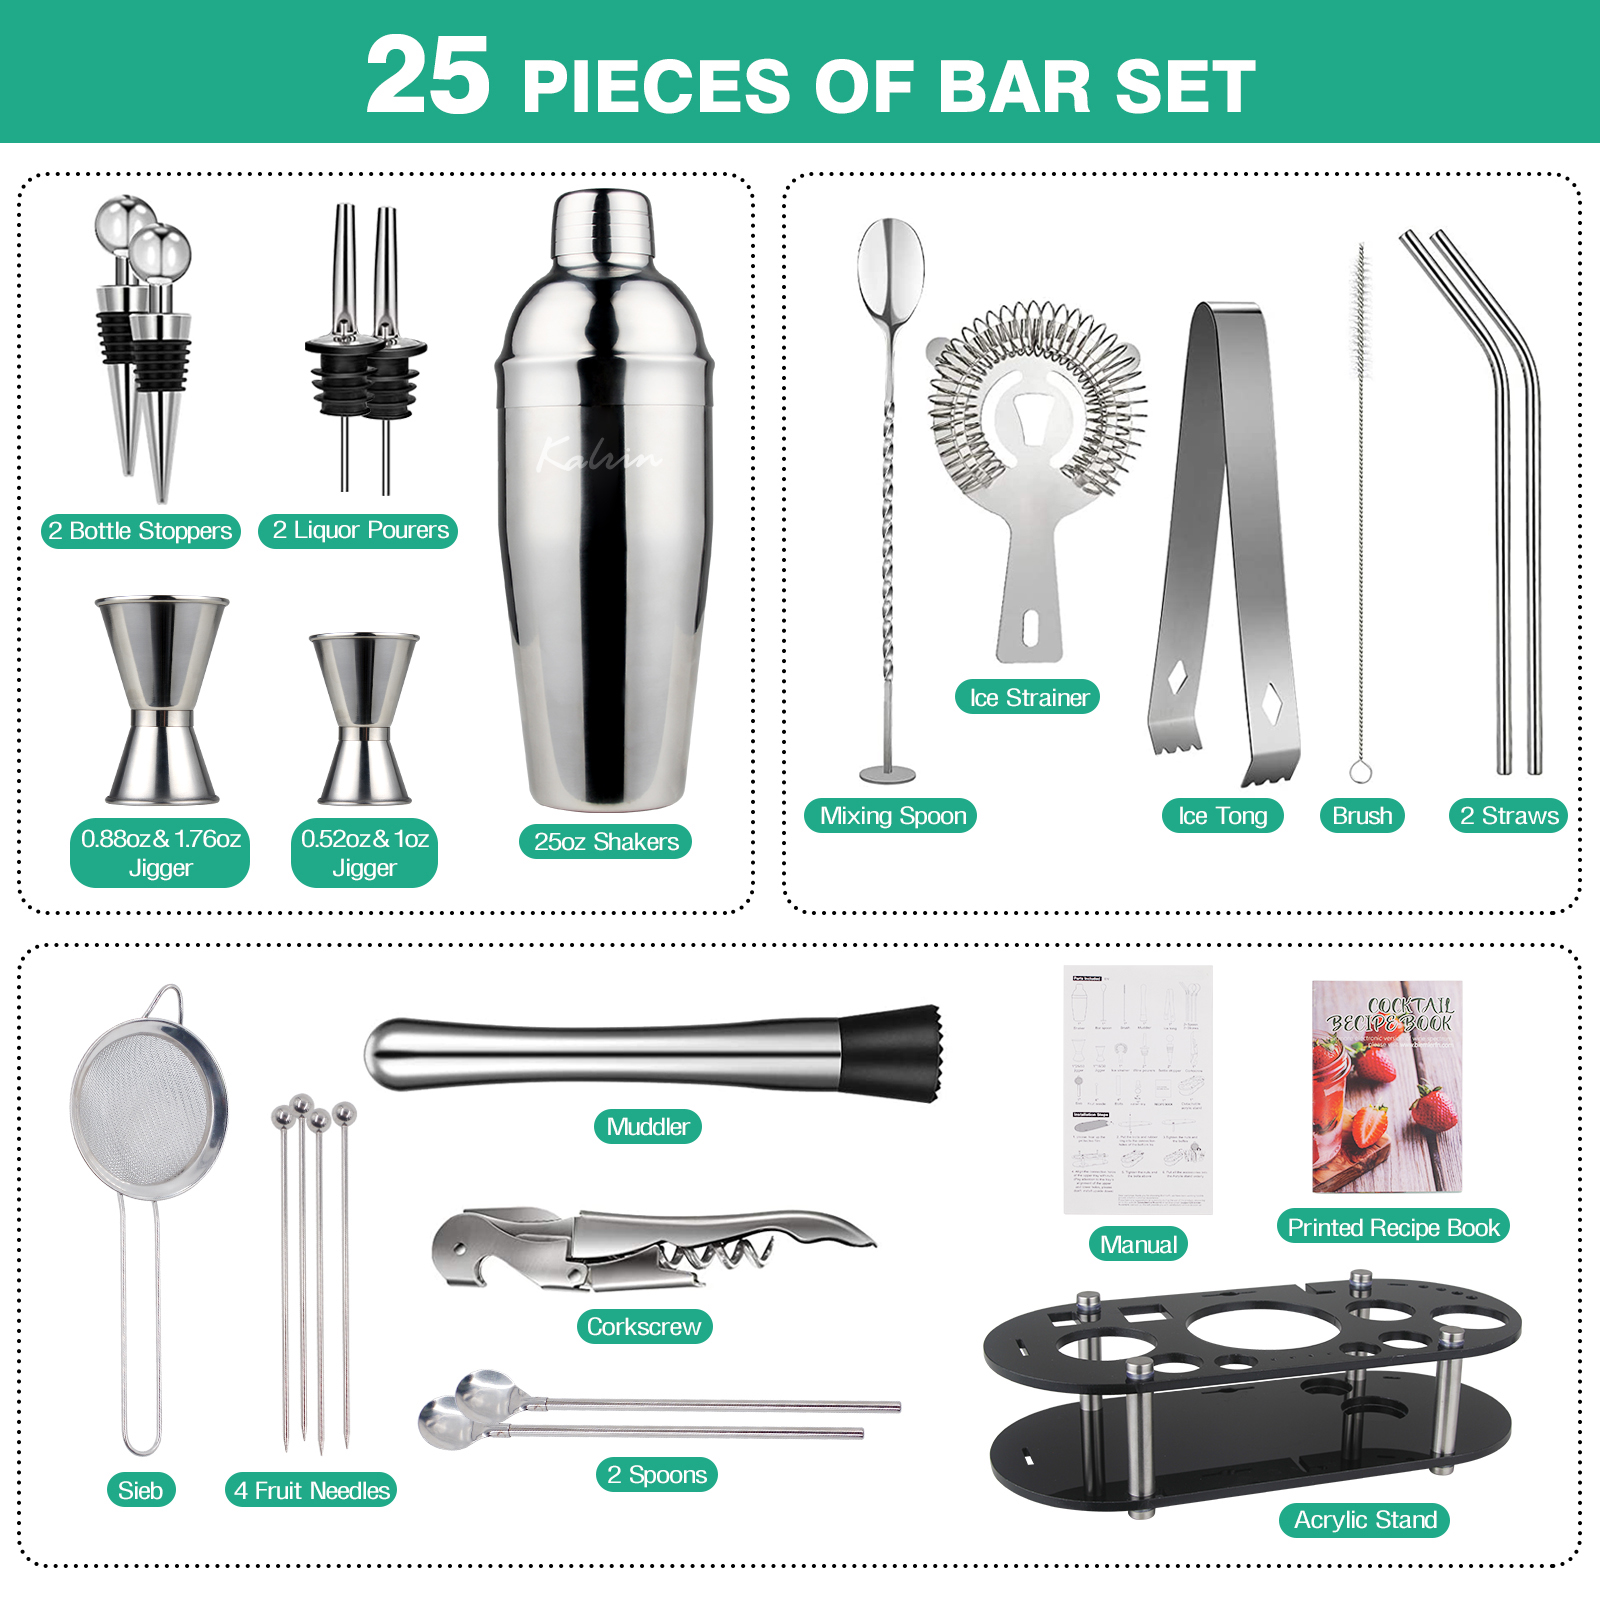 Kalrin Bartender Kit, 25-Piece Cocktail Shaker Set Stainless Steel Bar Tools with Acrylic Stand, Full Bartender Accessories - image 5 of 9